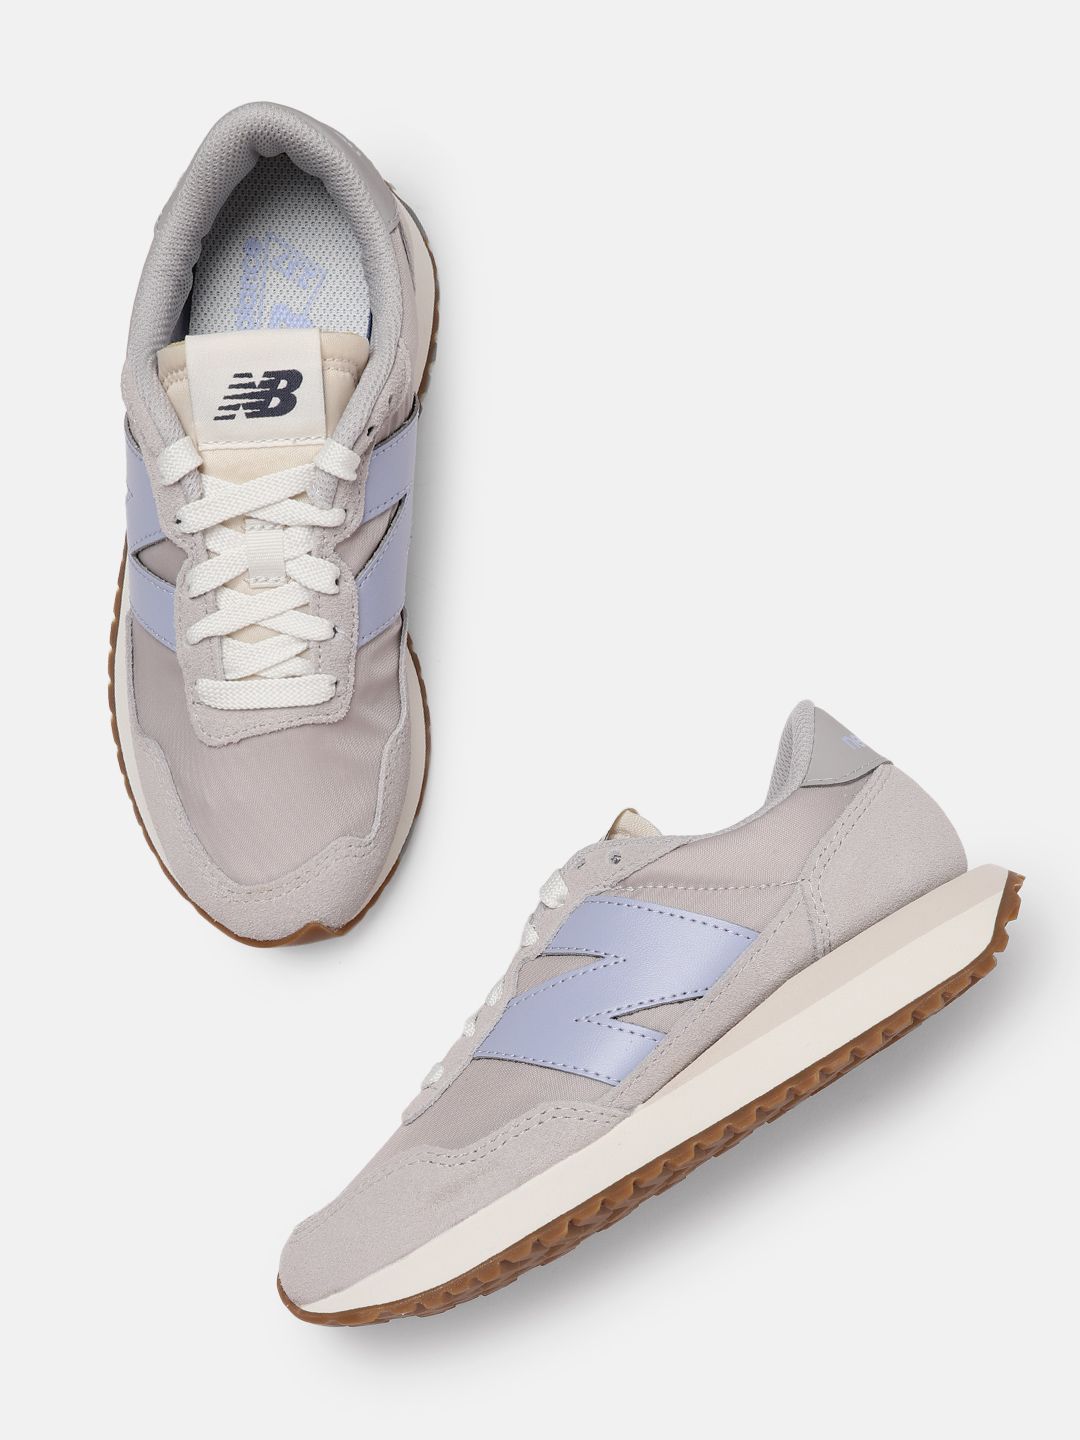 New Balance Women Grey Colourblocked Suede Sneakers Price in India